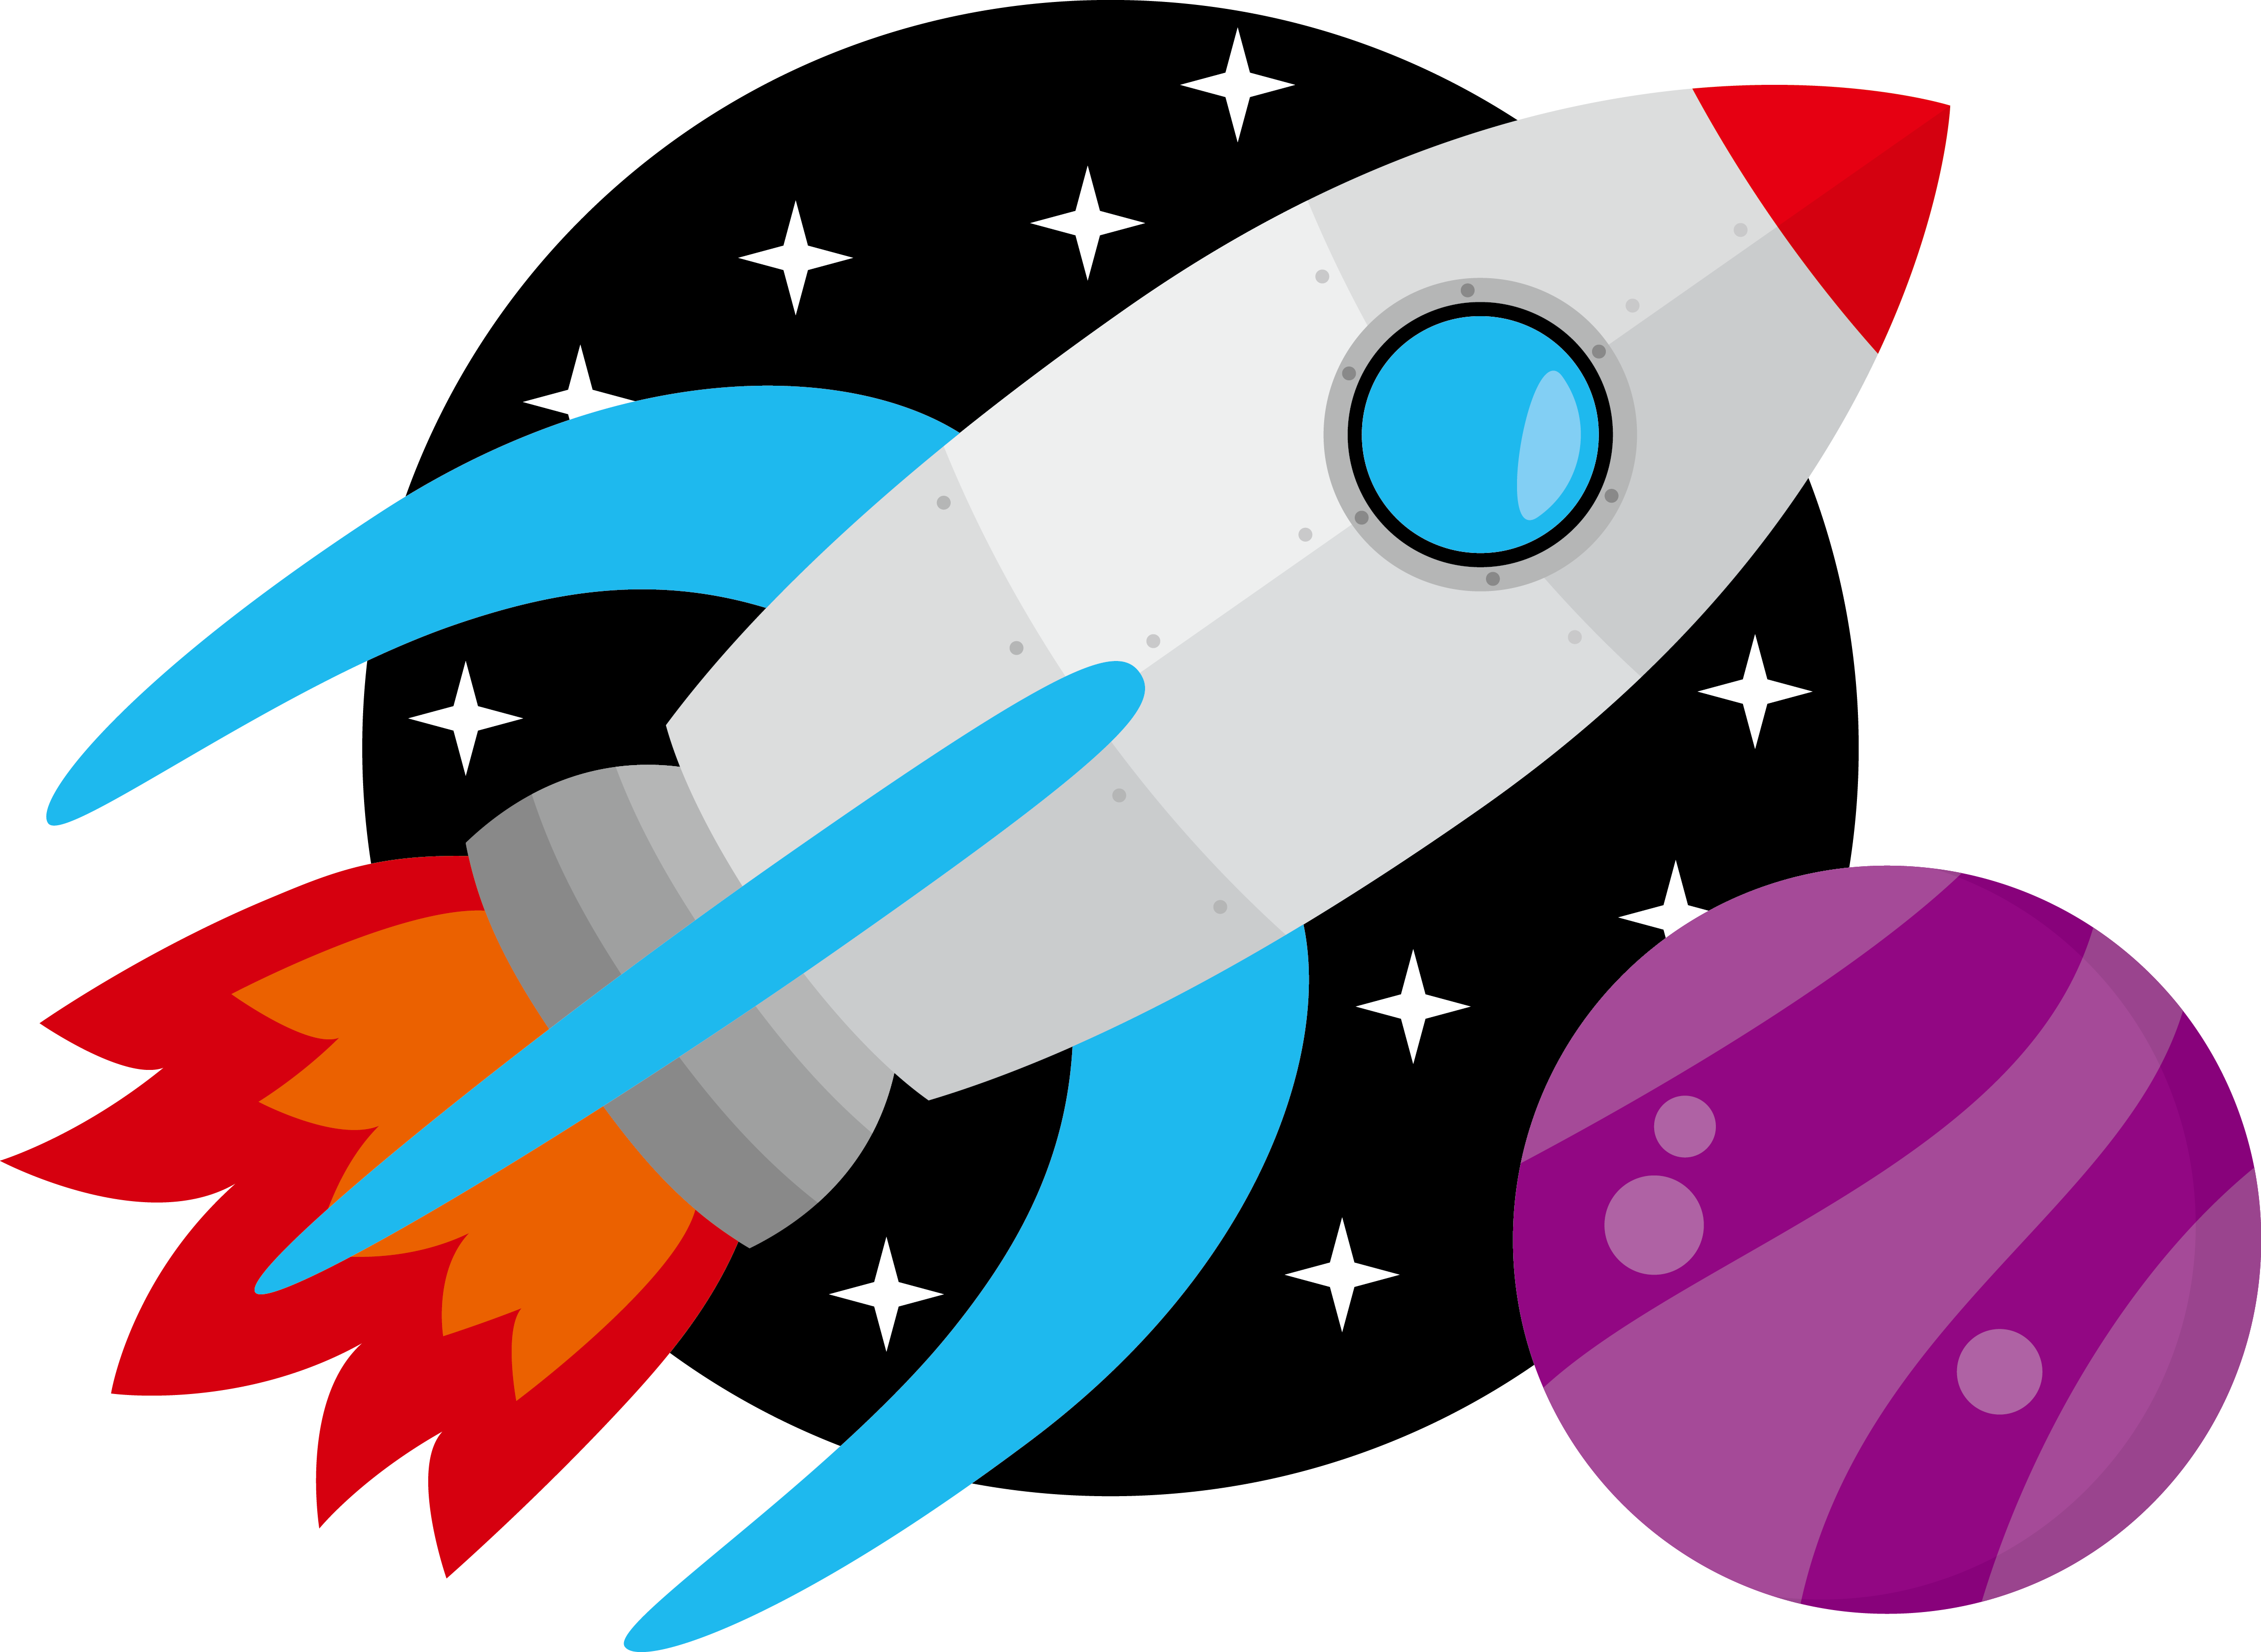 Rocket clipart for.